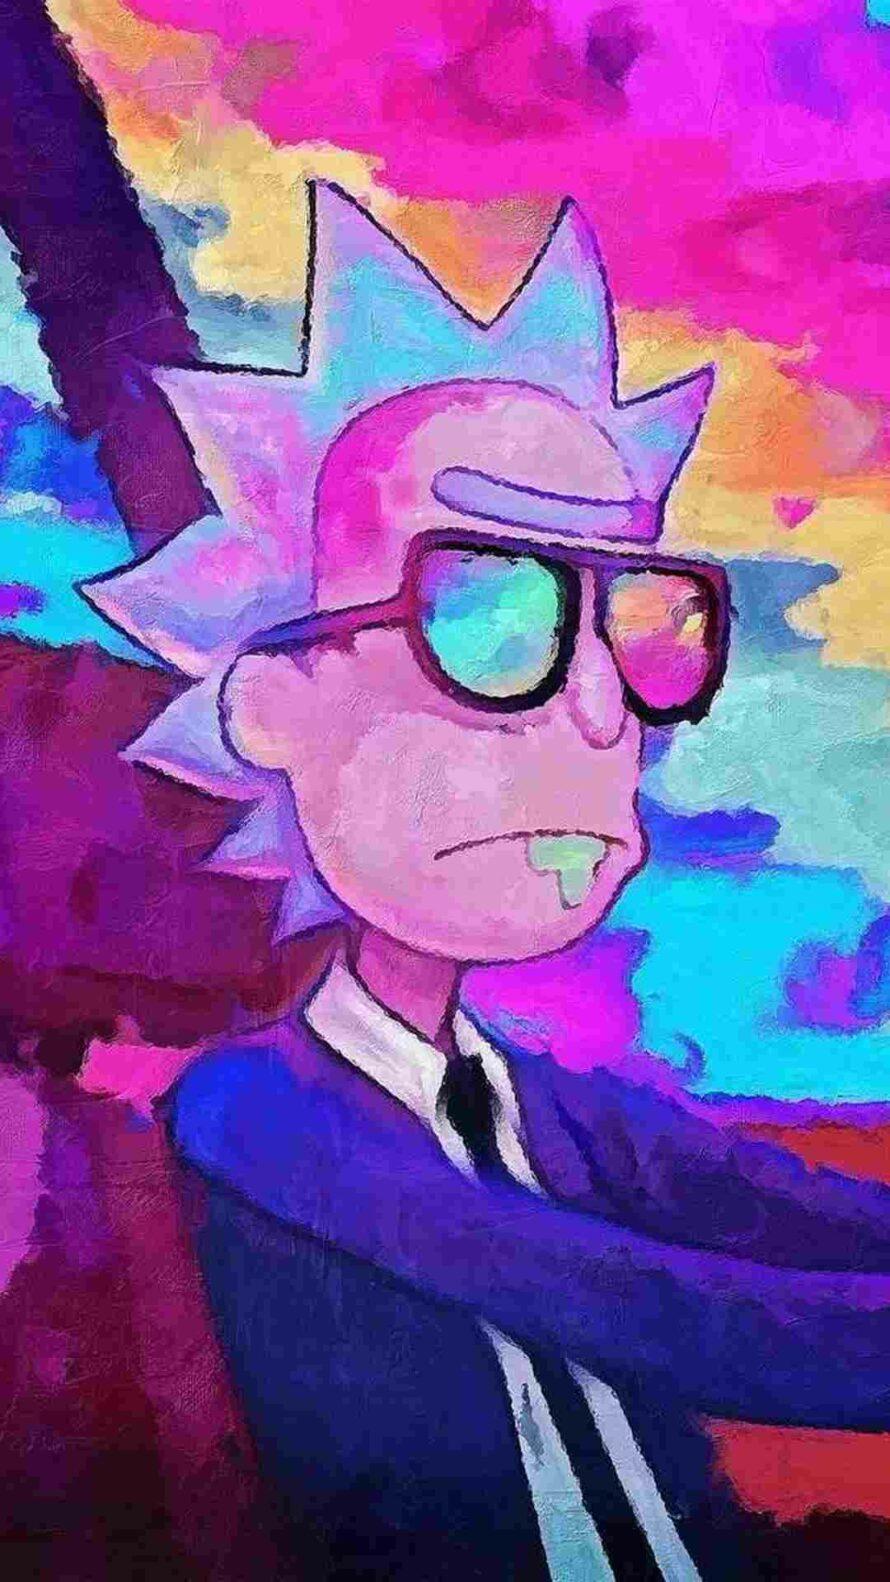 Rick and Morty Mobile Wallpaper - 2023 Movie Poster Wallpaper HD in 2023